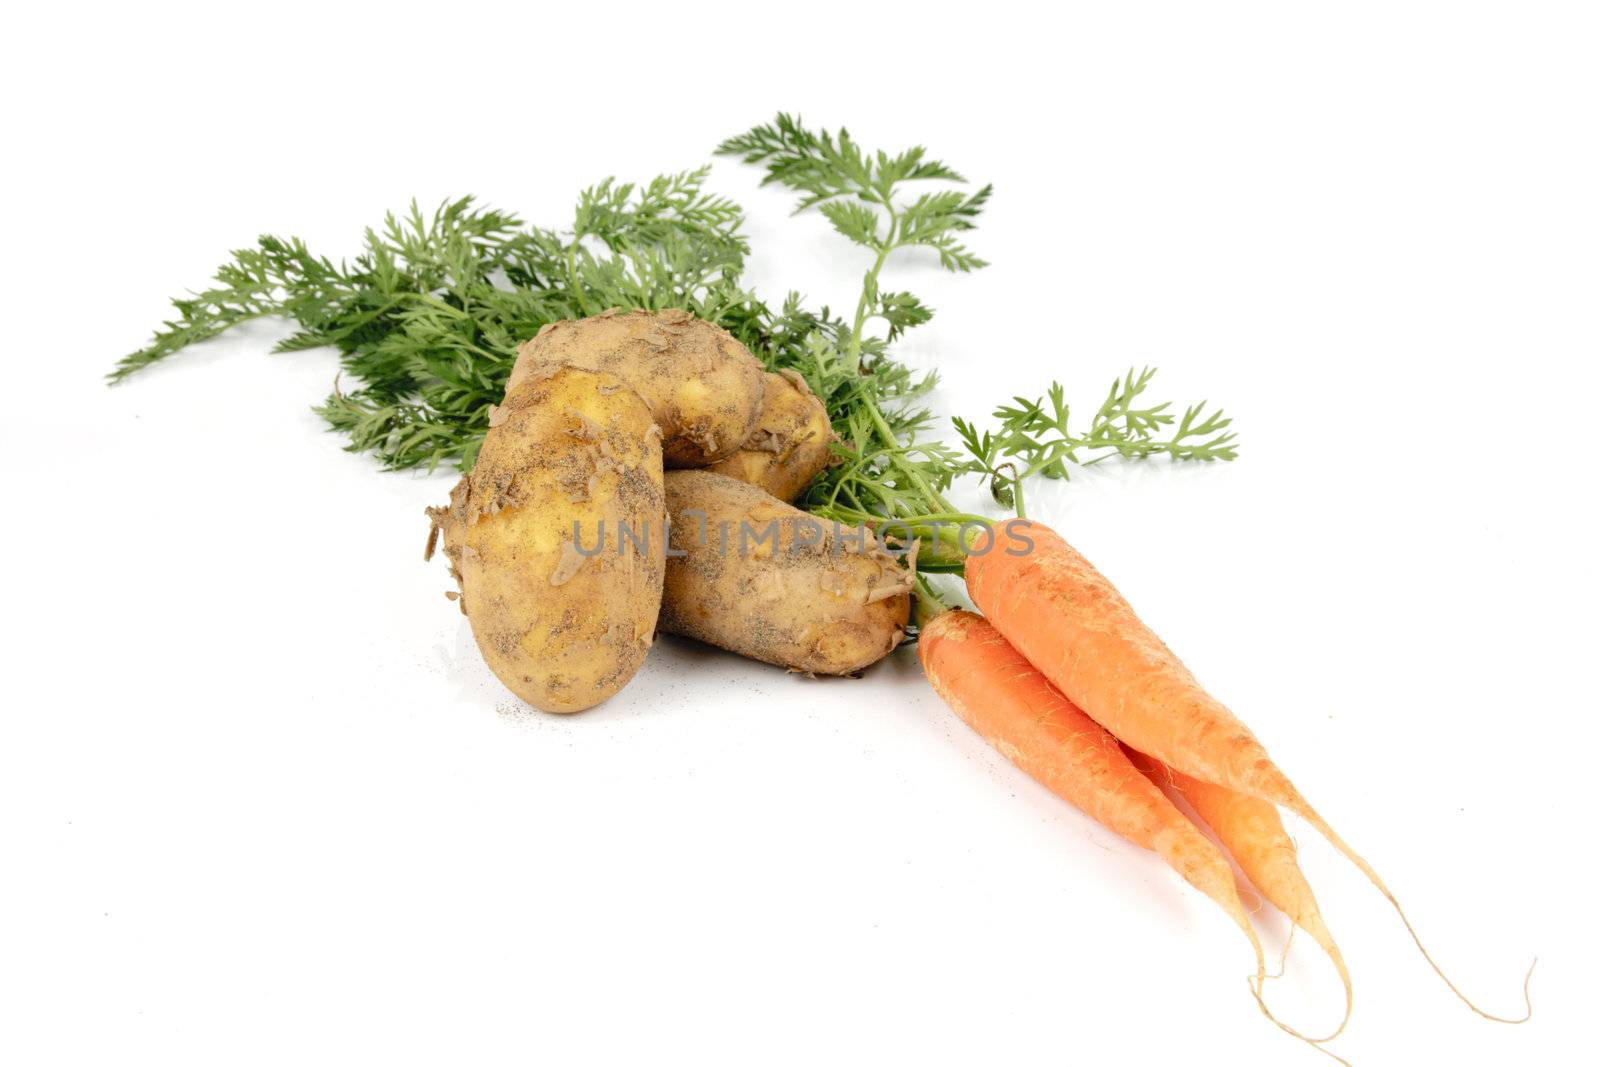 Bunch on raw crunchy carrots on a reflective white background